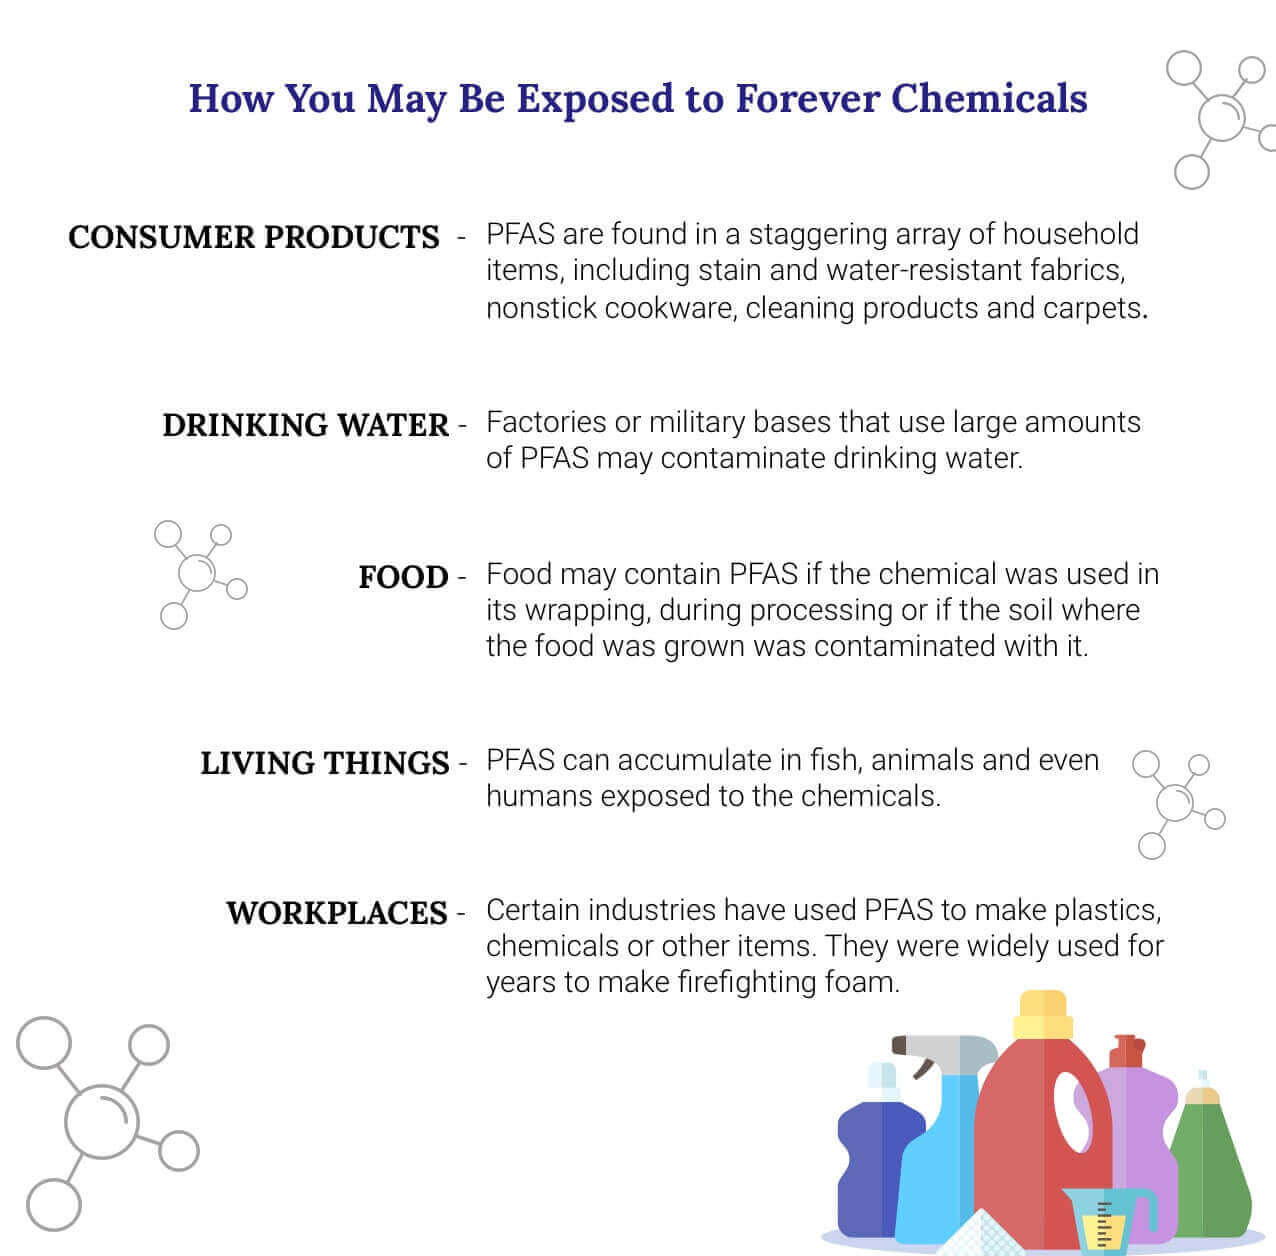 Forever chemicals made by DuPont caused significant harm •